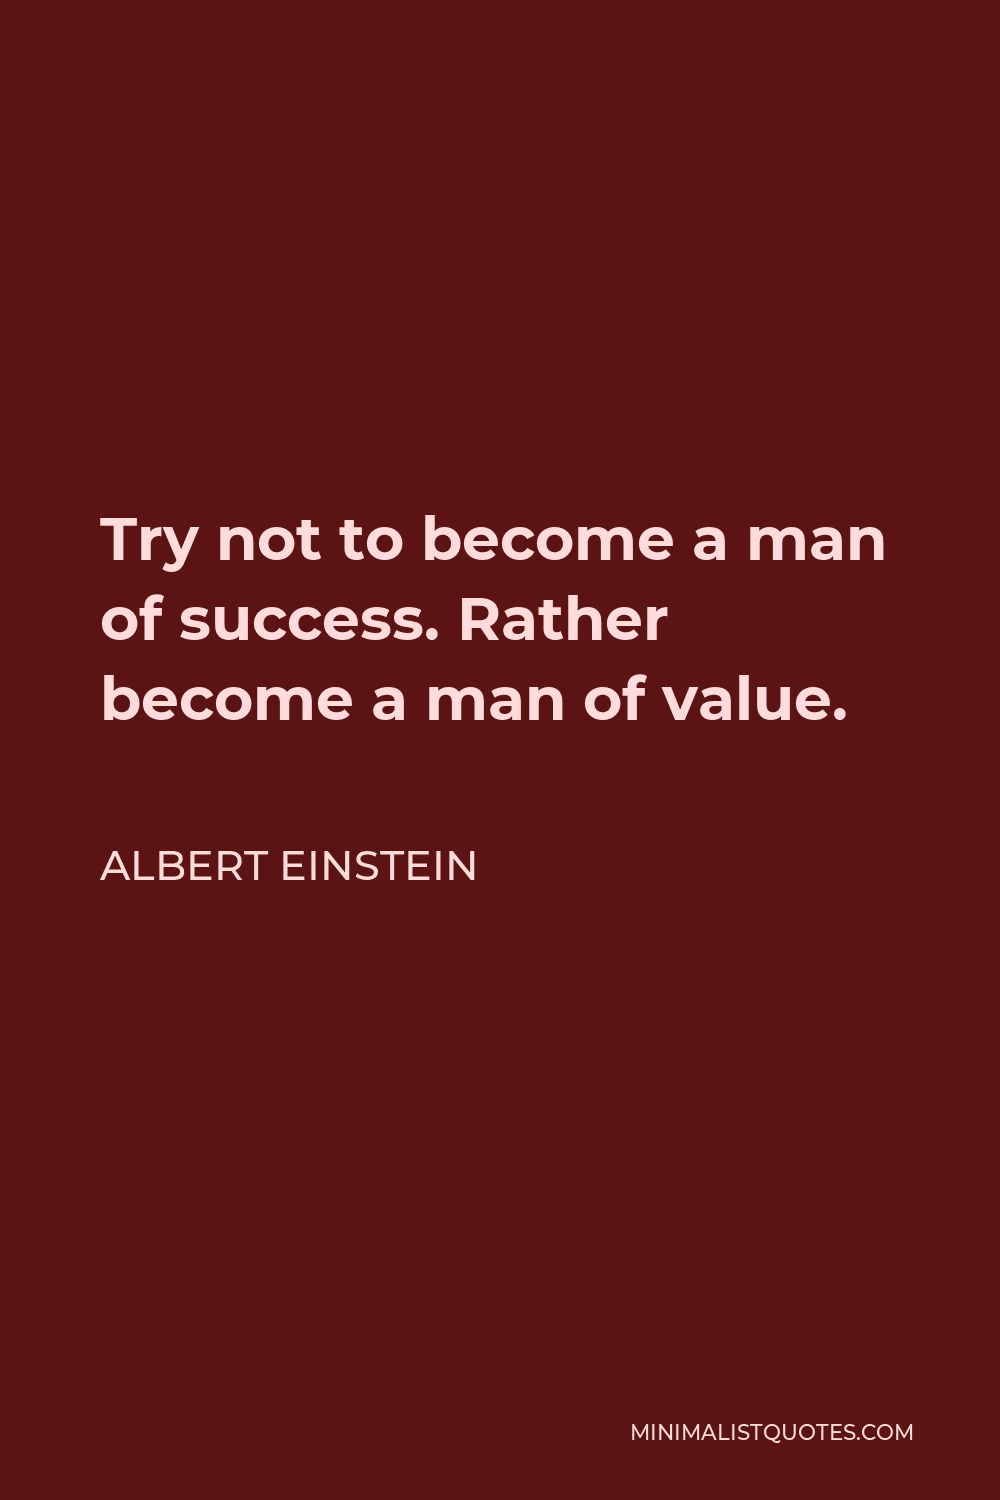 Albert Einstein Quote - Try not to become a man of success. Rather become a man of value.